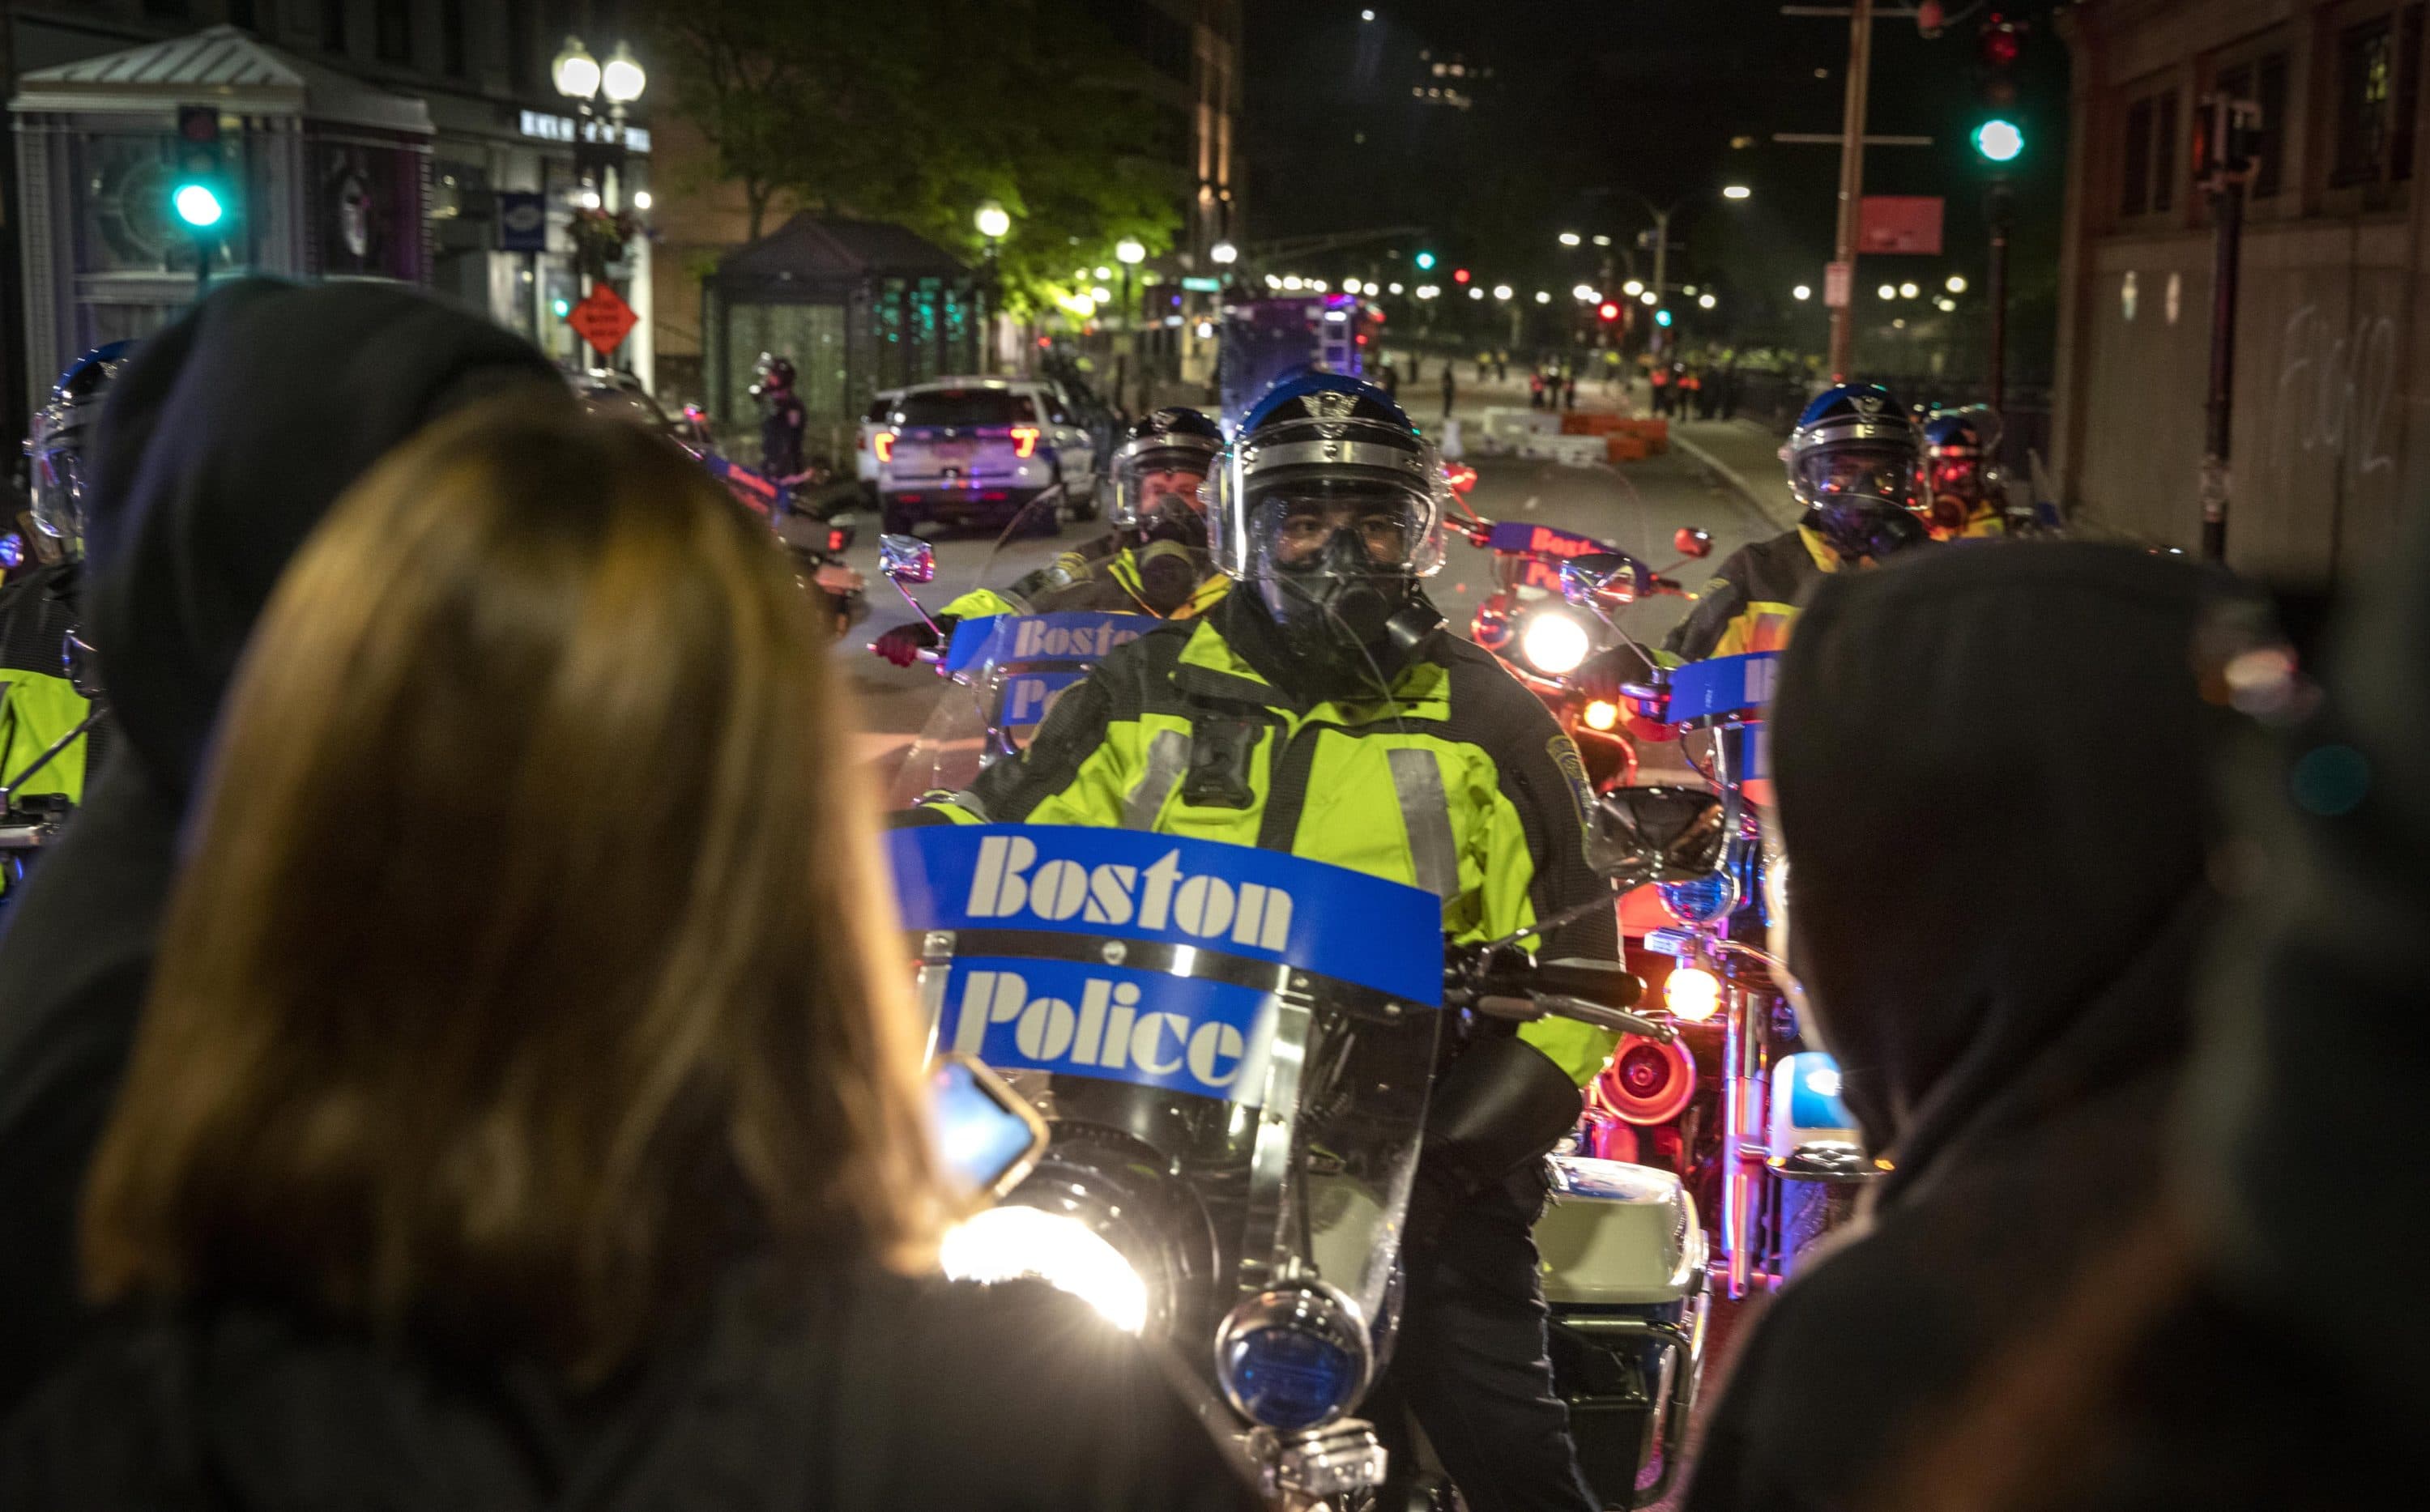 A Boston police officer at the protests against police brutality on May 31 is seen wearing a body camera. (Robin Lubbock/WBUR)